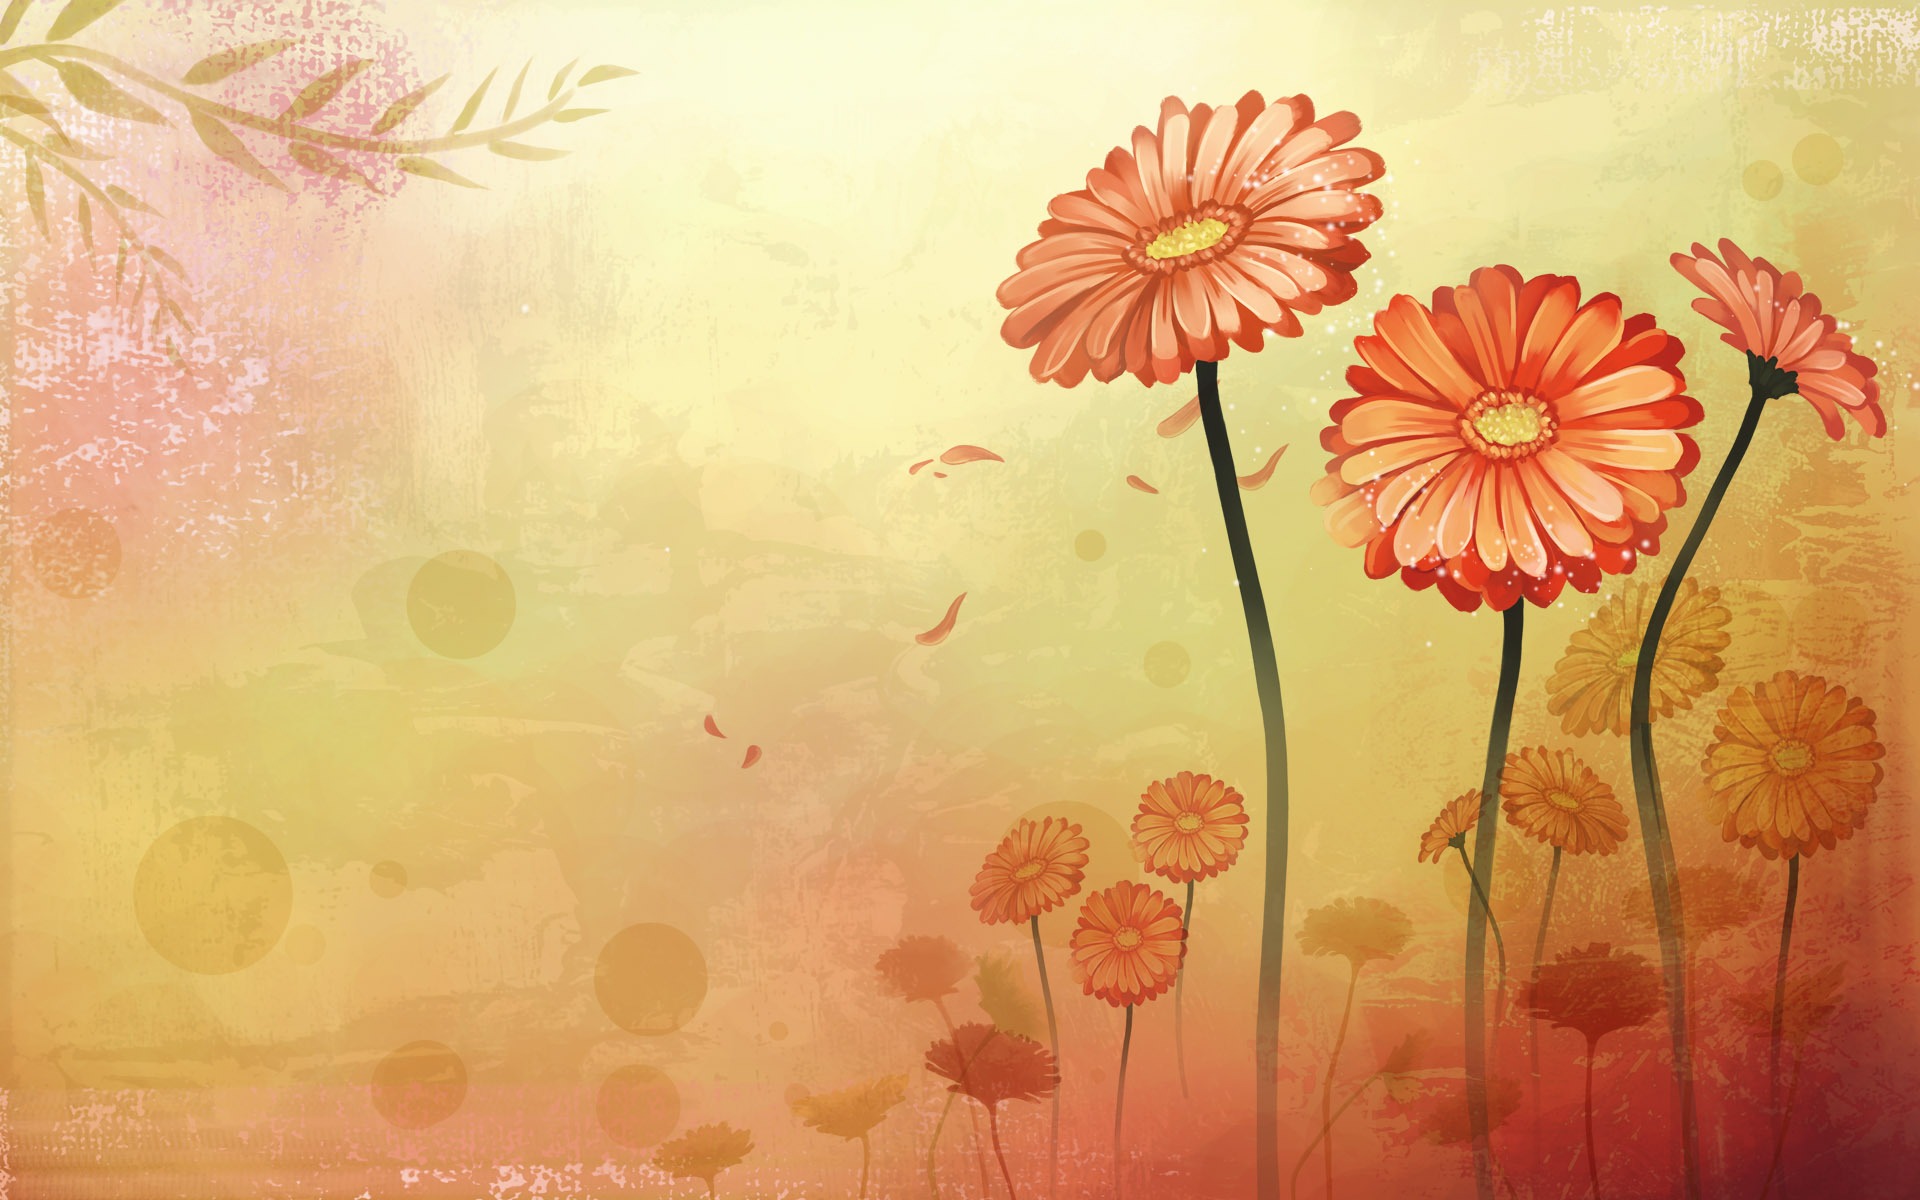 Synthetic Wallpaper Colorful Flower #28 - 1920x1200